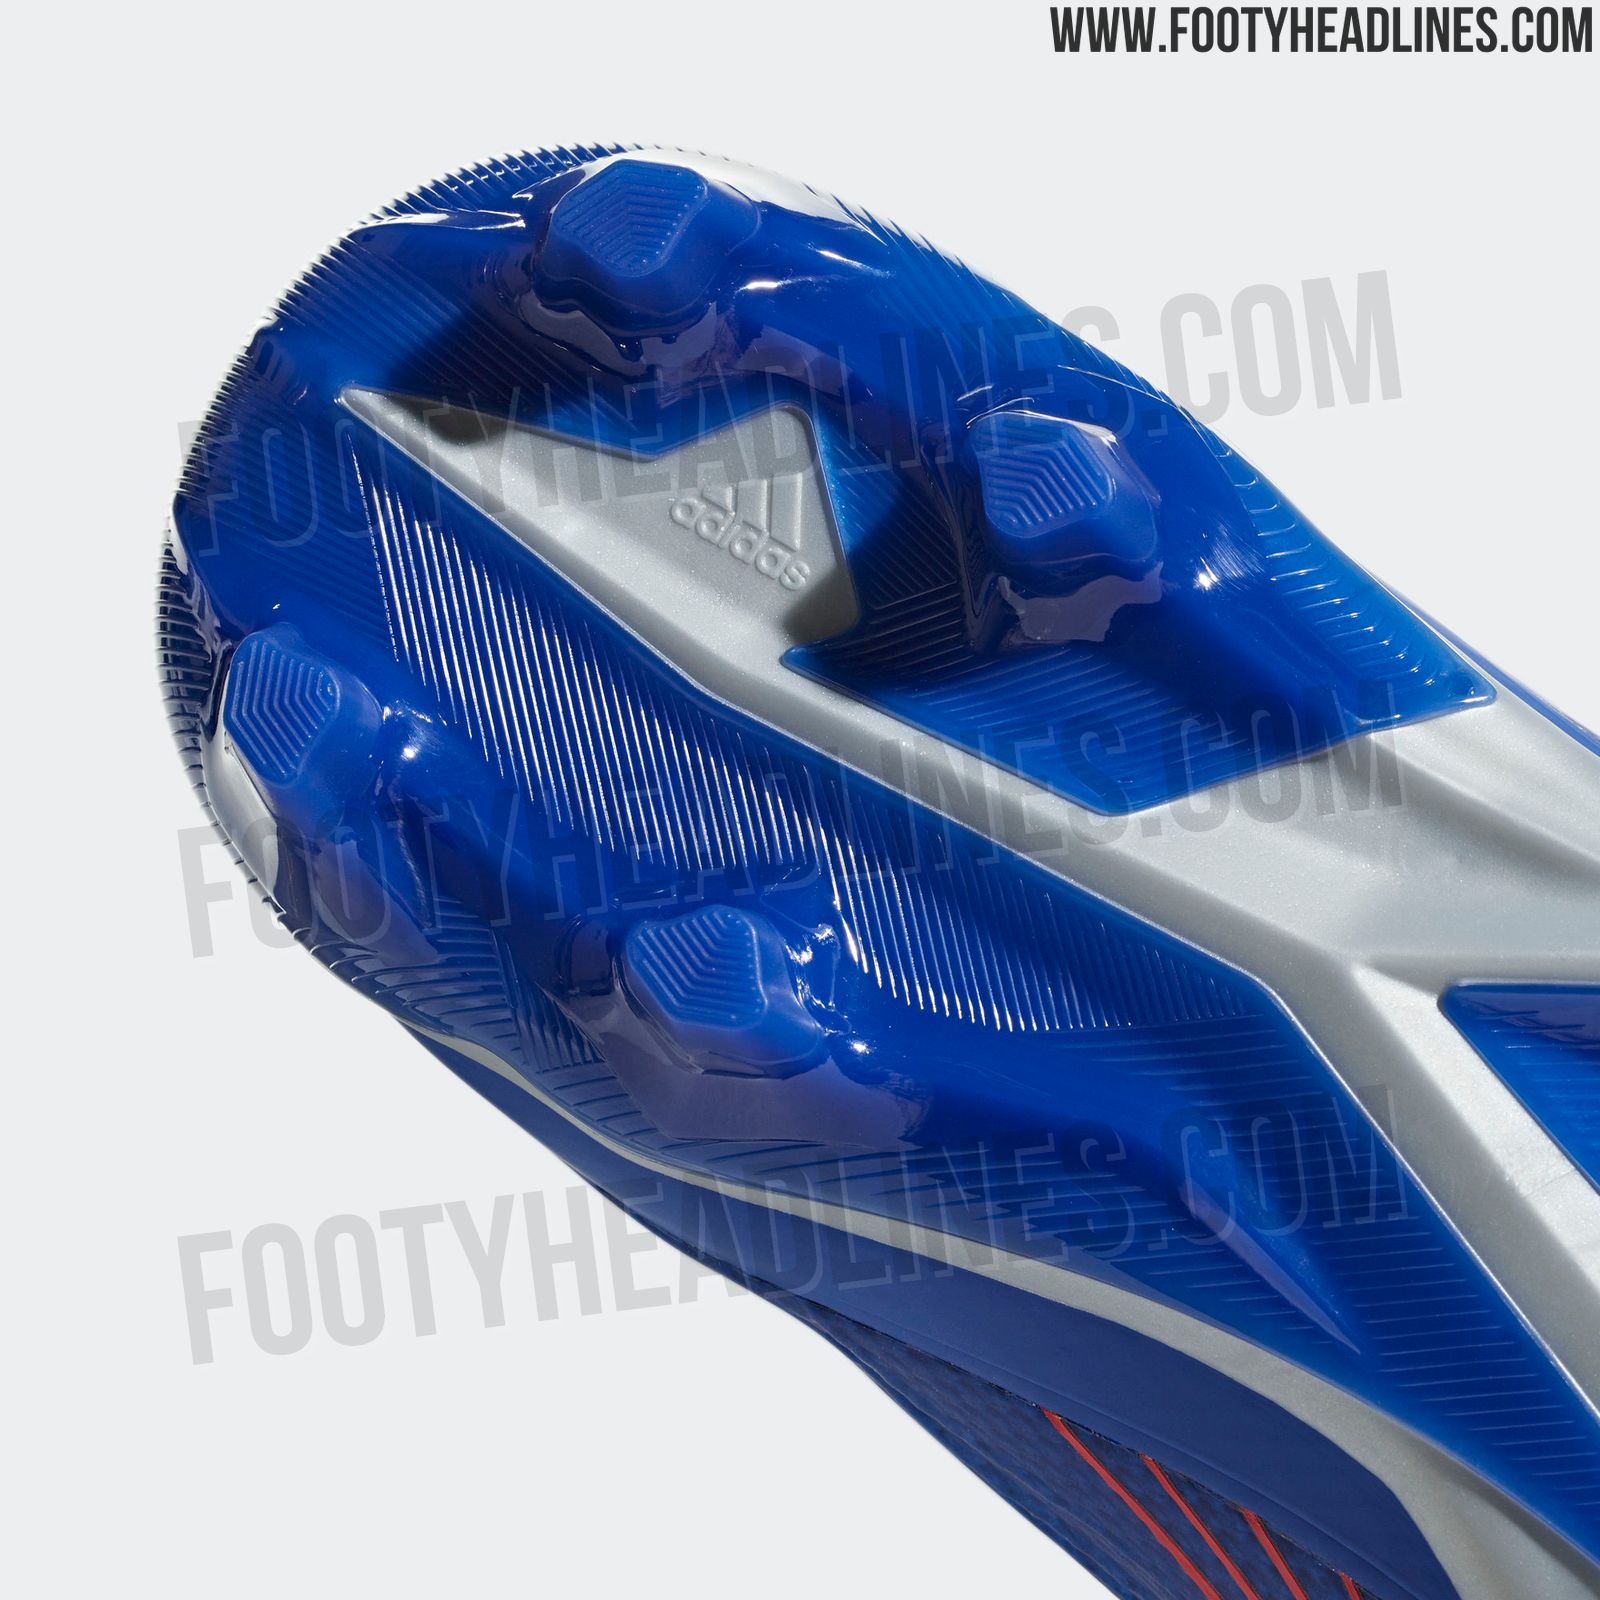 Official Pictures: Blue / Silver / Red Adidas Predator 'Exhibit Pack ...